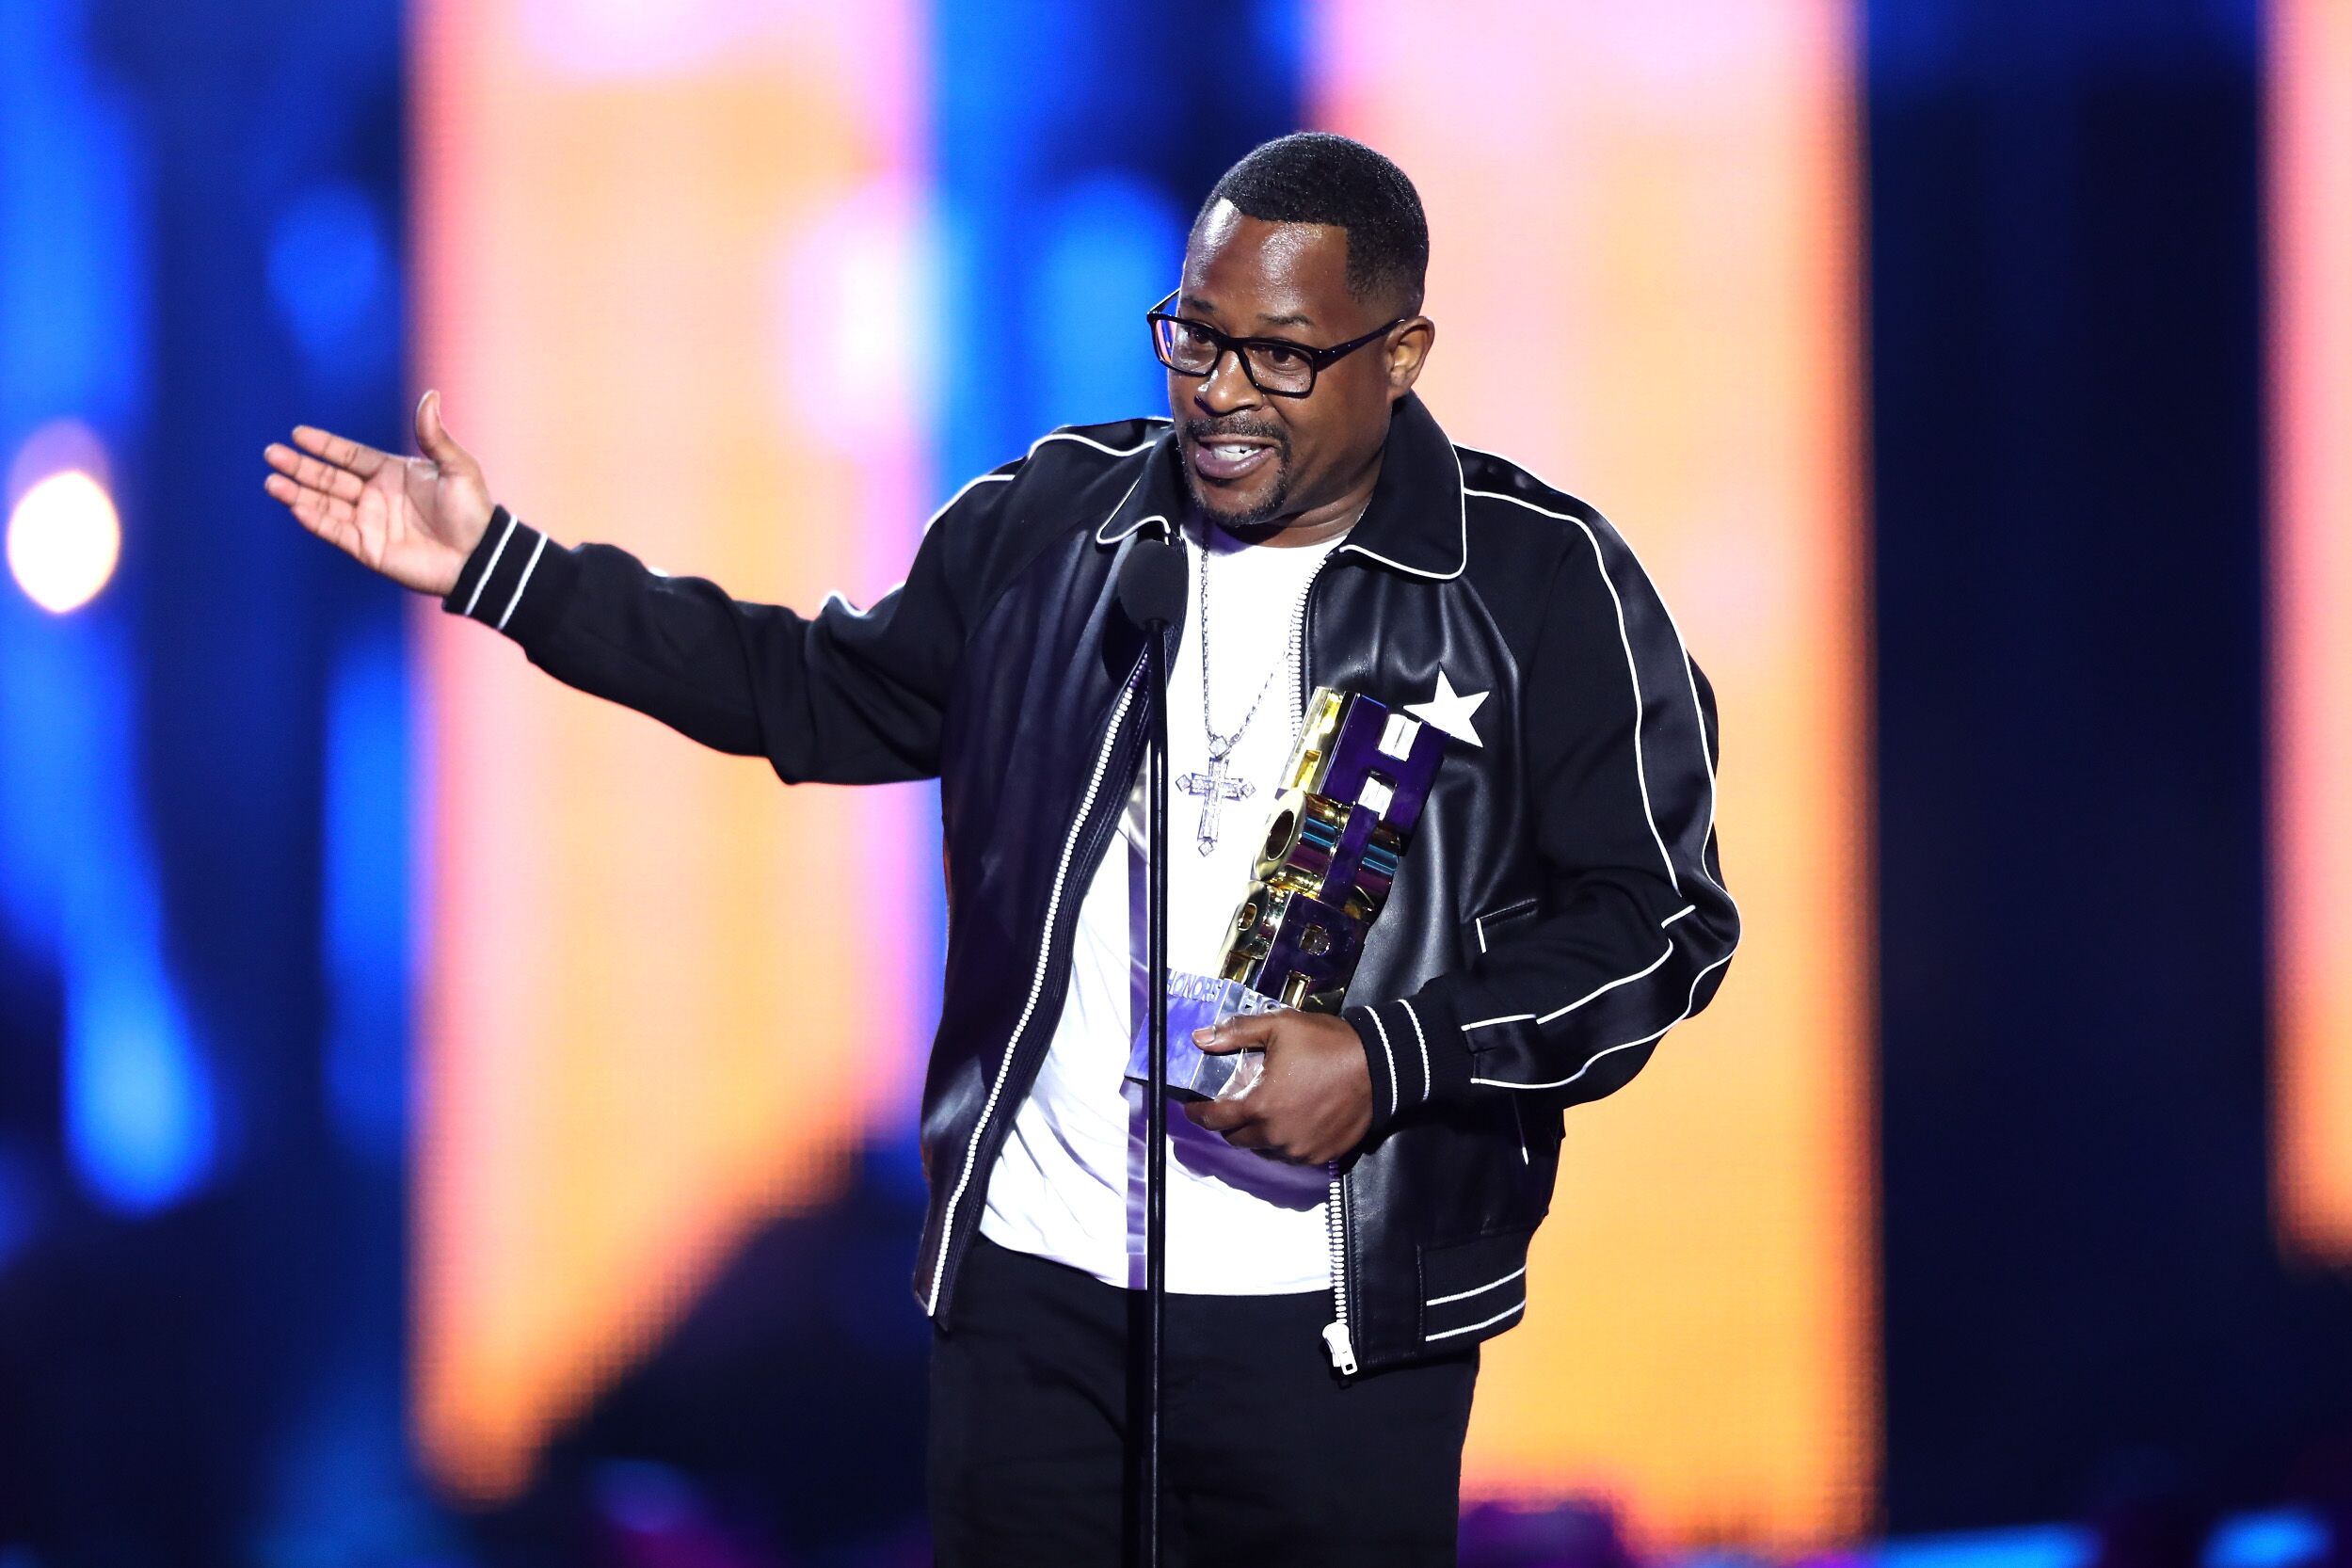 Martin Lawrence receiving an award onstage | Source: Getty Images/GlobalImagesUkraine